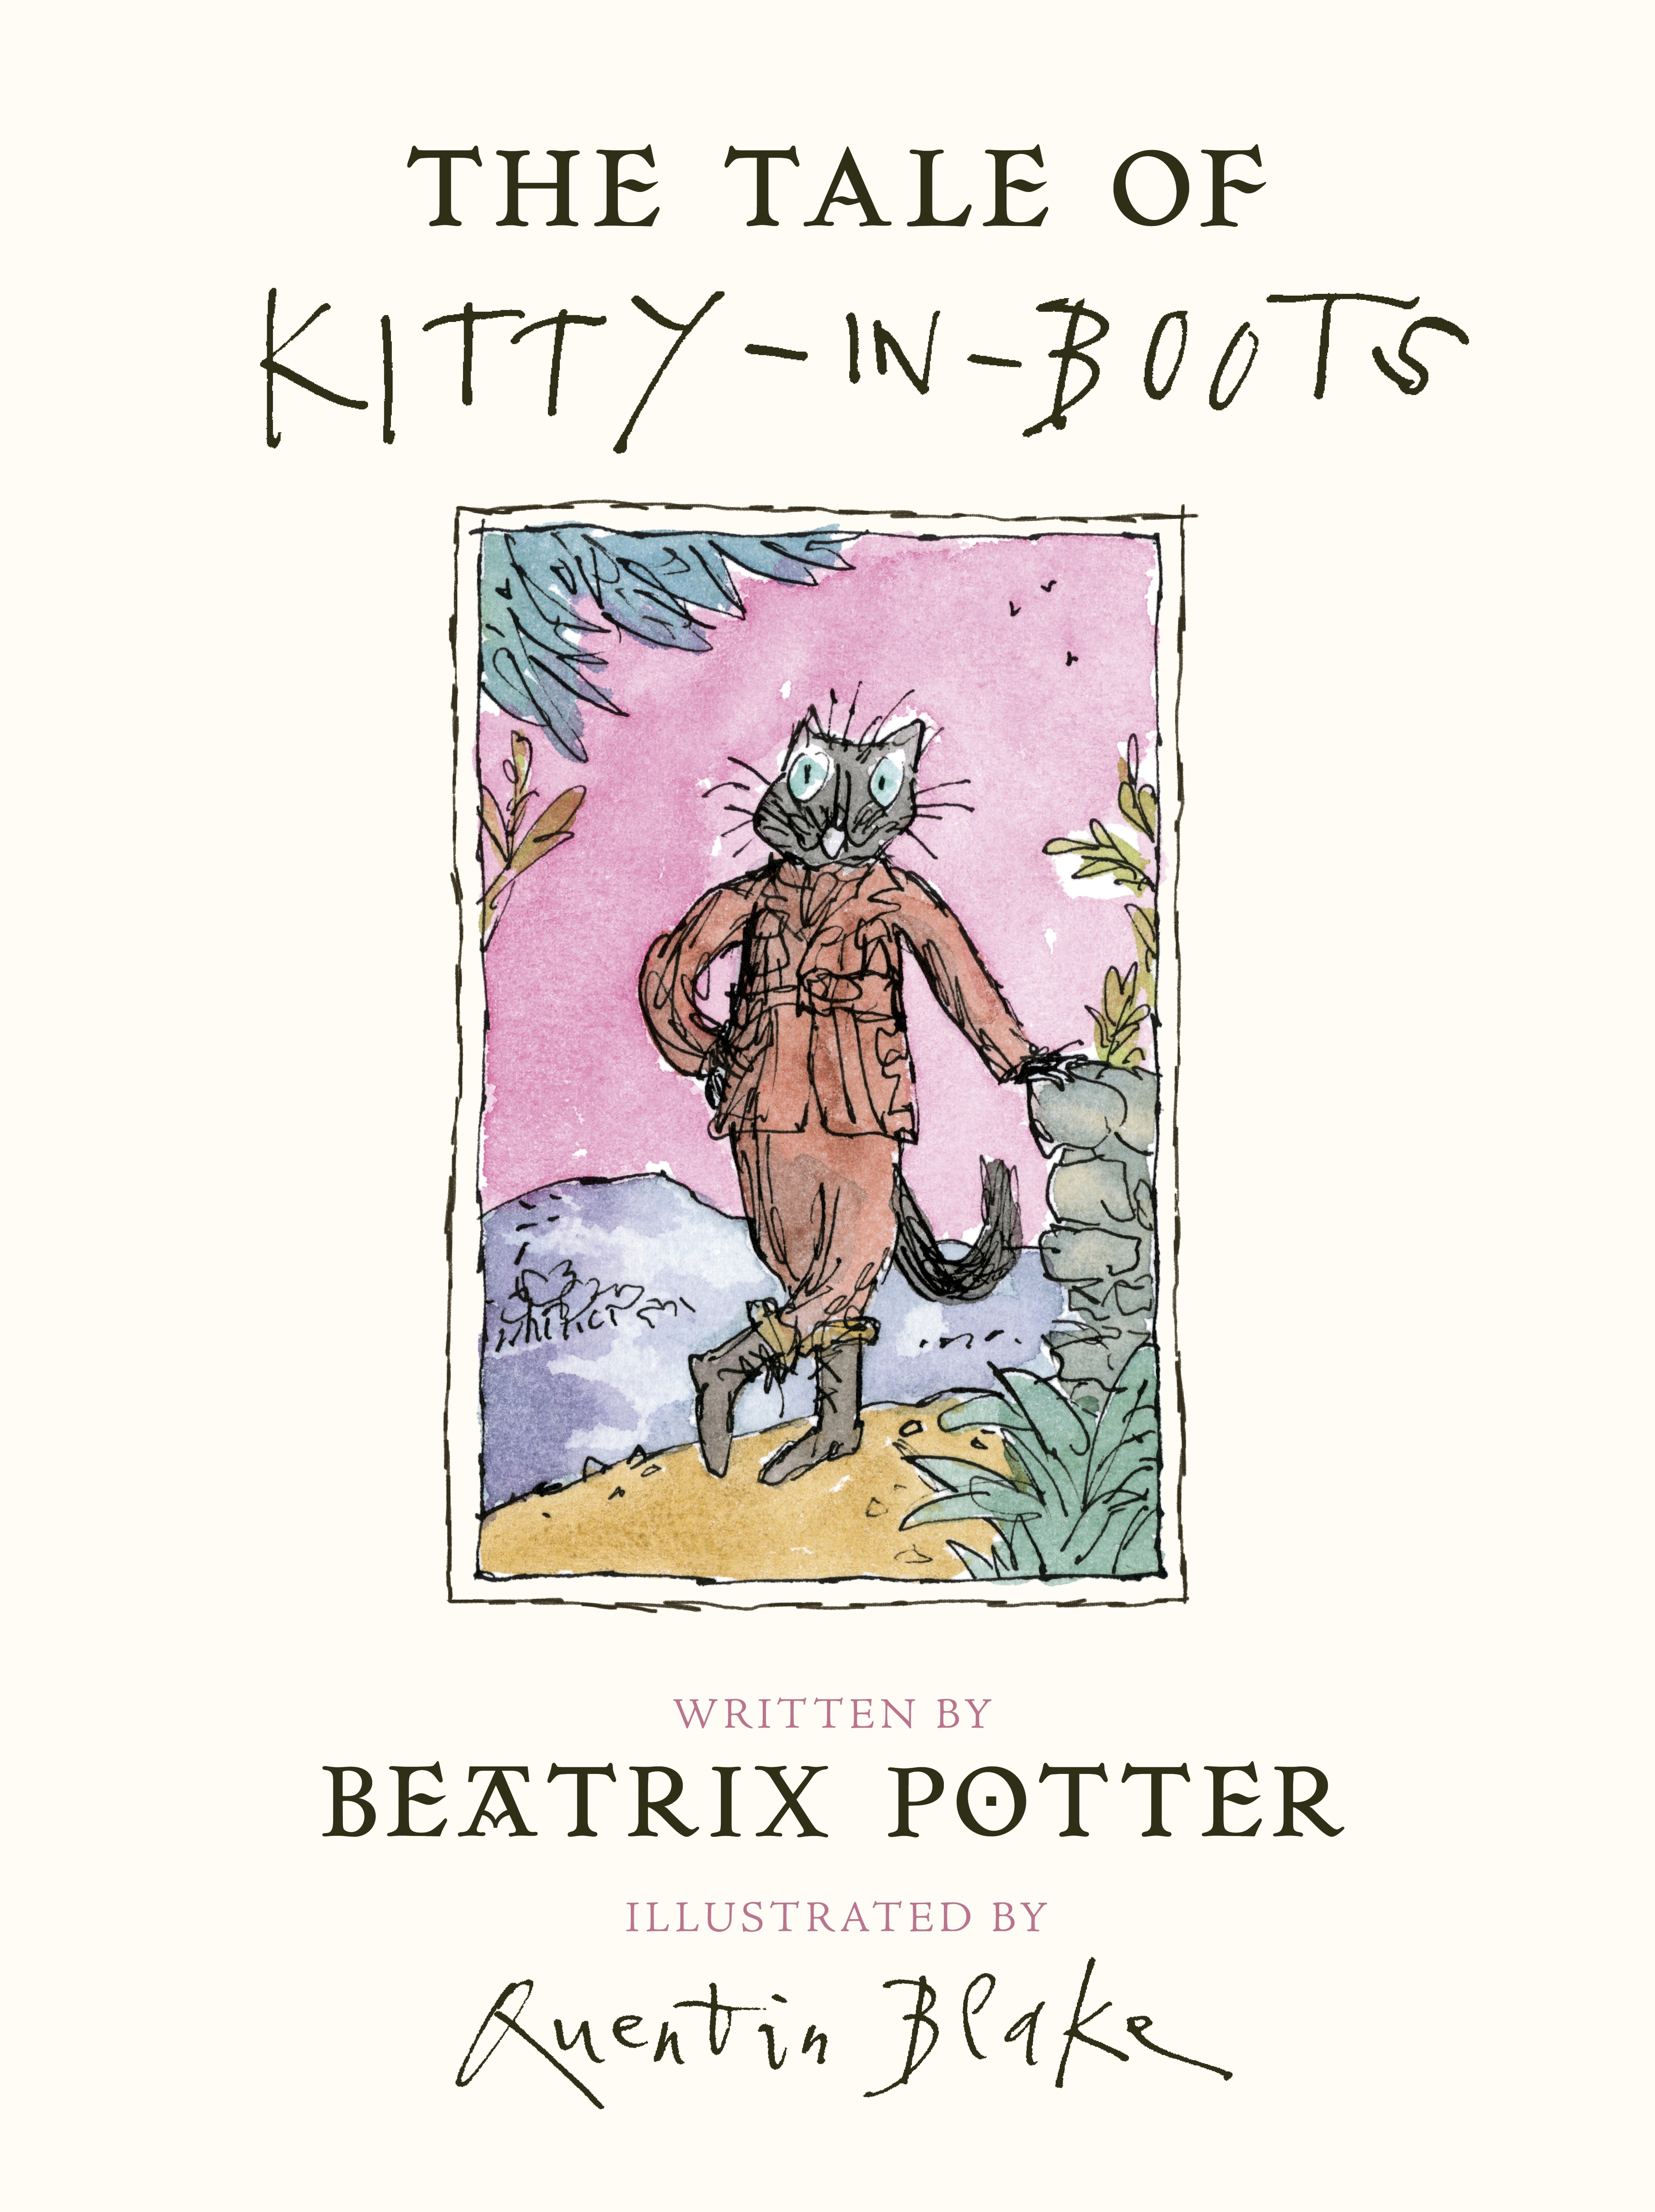 Book “The Tale of Kitty In Boots” by Beatrix Potter, Quentin Blake — September 1, 2016